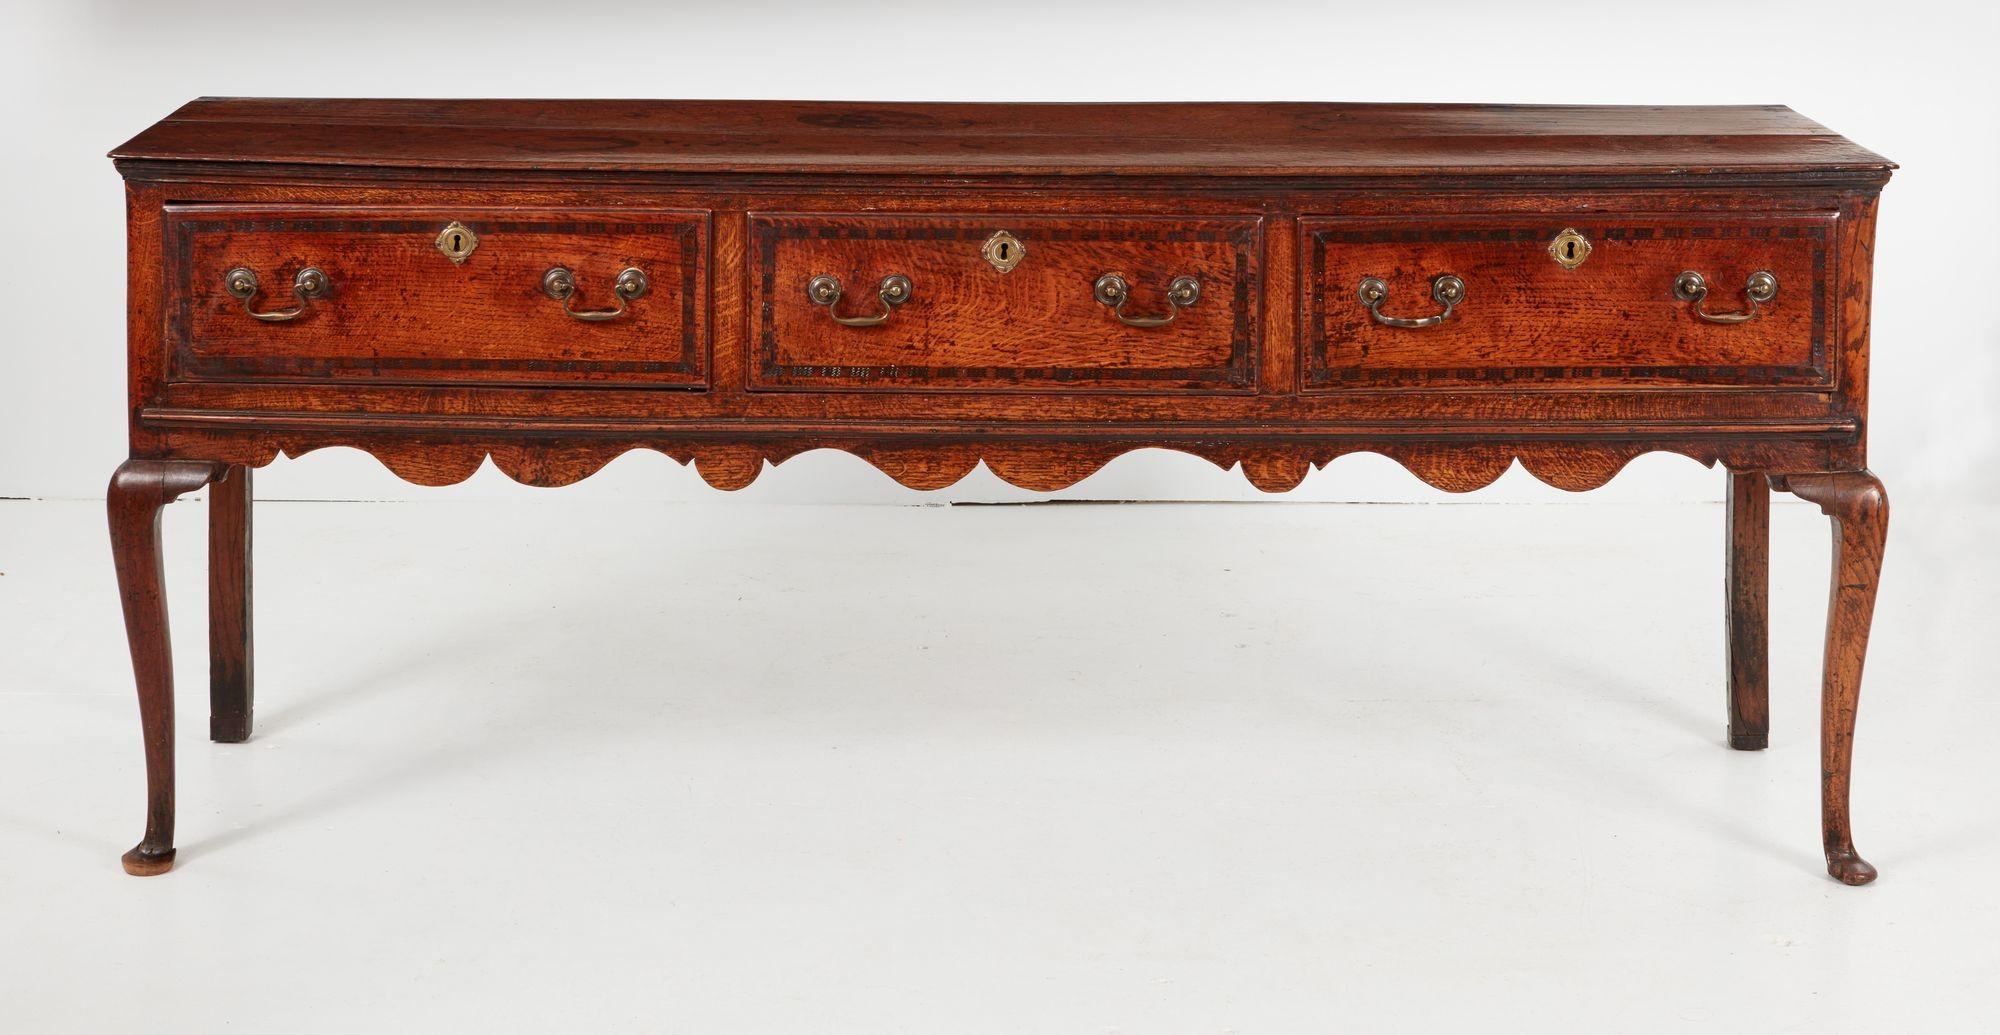 An elegant Welsh oak sideboard or dresser base having two-plank top over three cross-banded drawers above scalloped wave form apron on jaunty cabriole front legs ending in pad feet with straight square section back legs. Molded paneled sides. Good